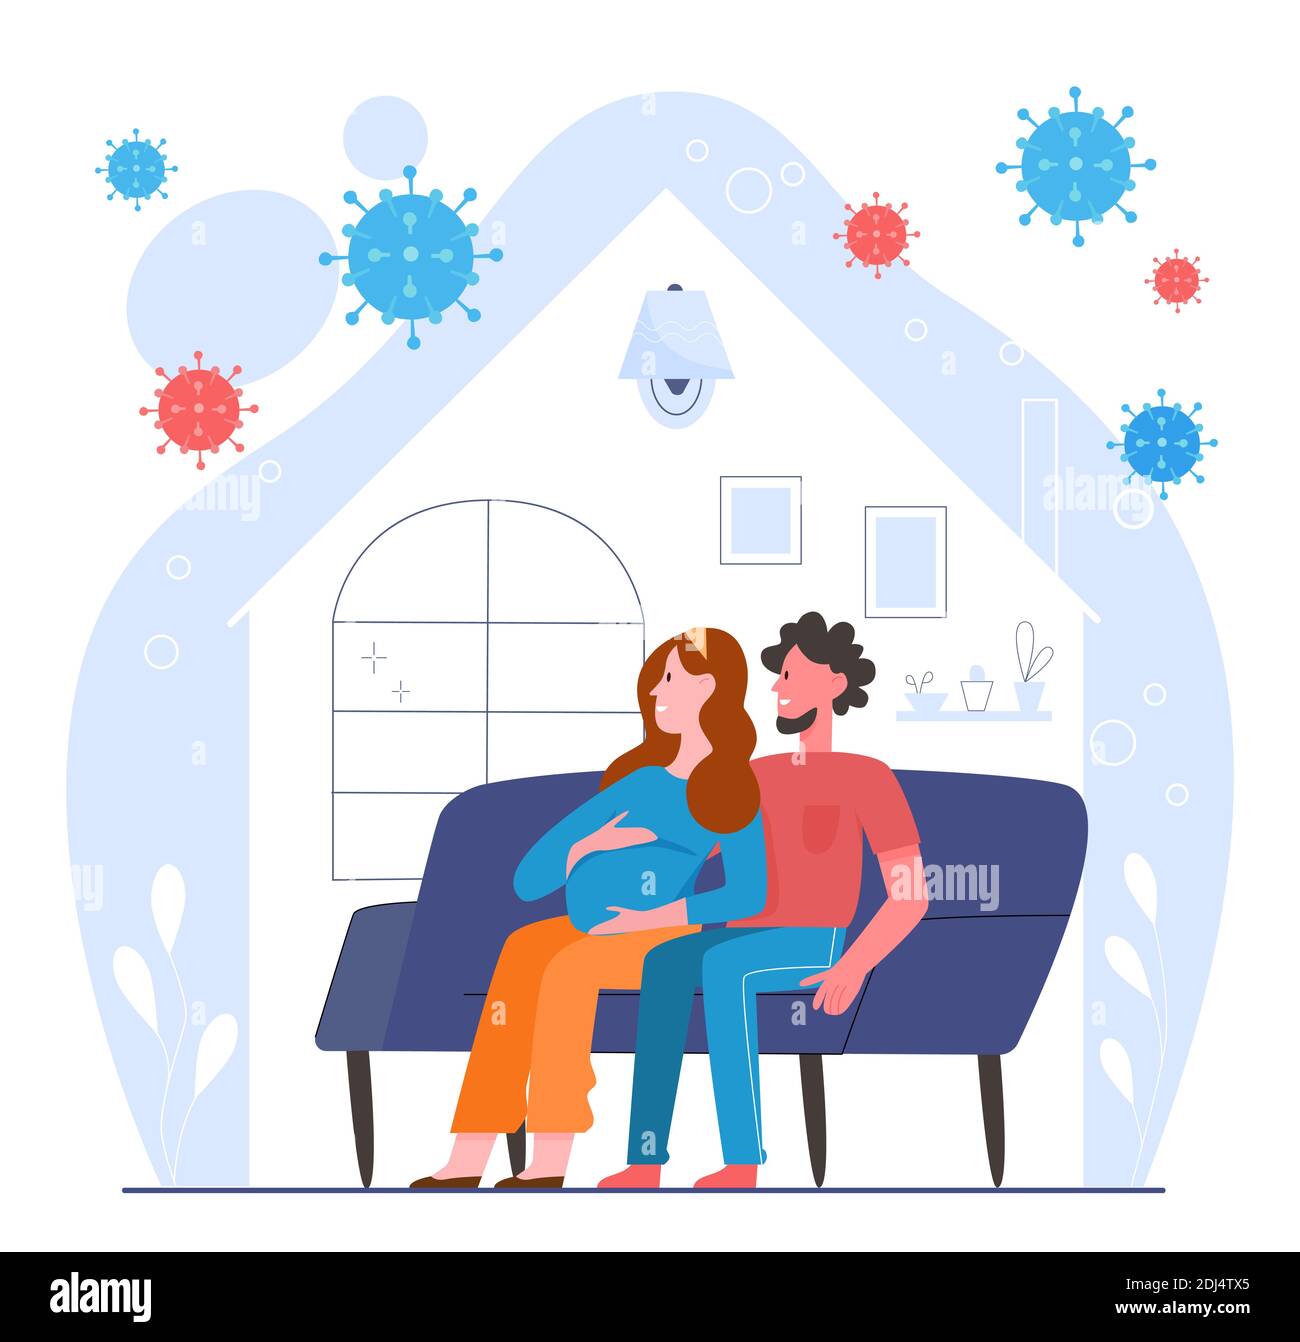 People stay at home to protect health from coronavirus vector illustration. Cartoon couple character sitting at sofa, happy pregnant woman with man staying at home during covid19 pandemic quarantine Stock Vector